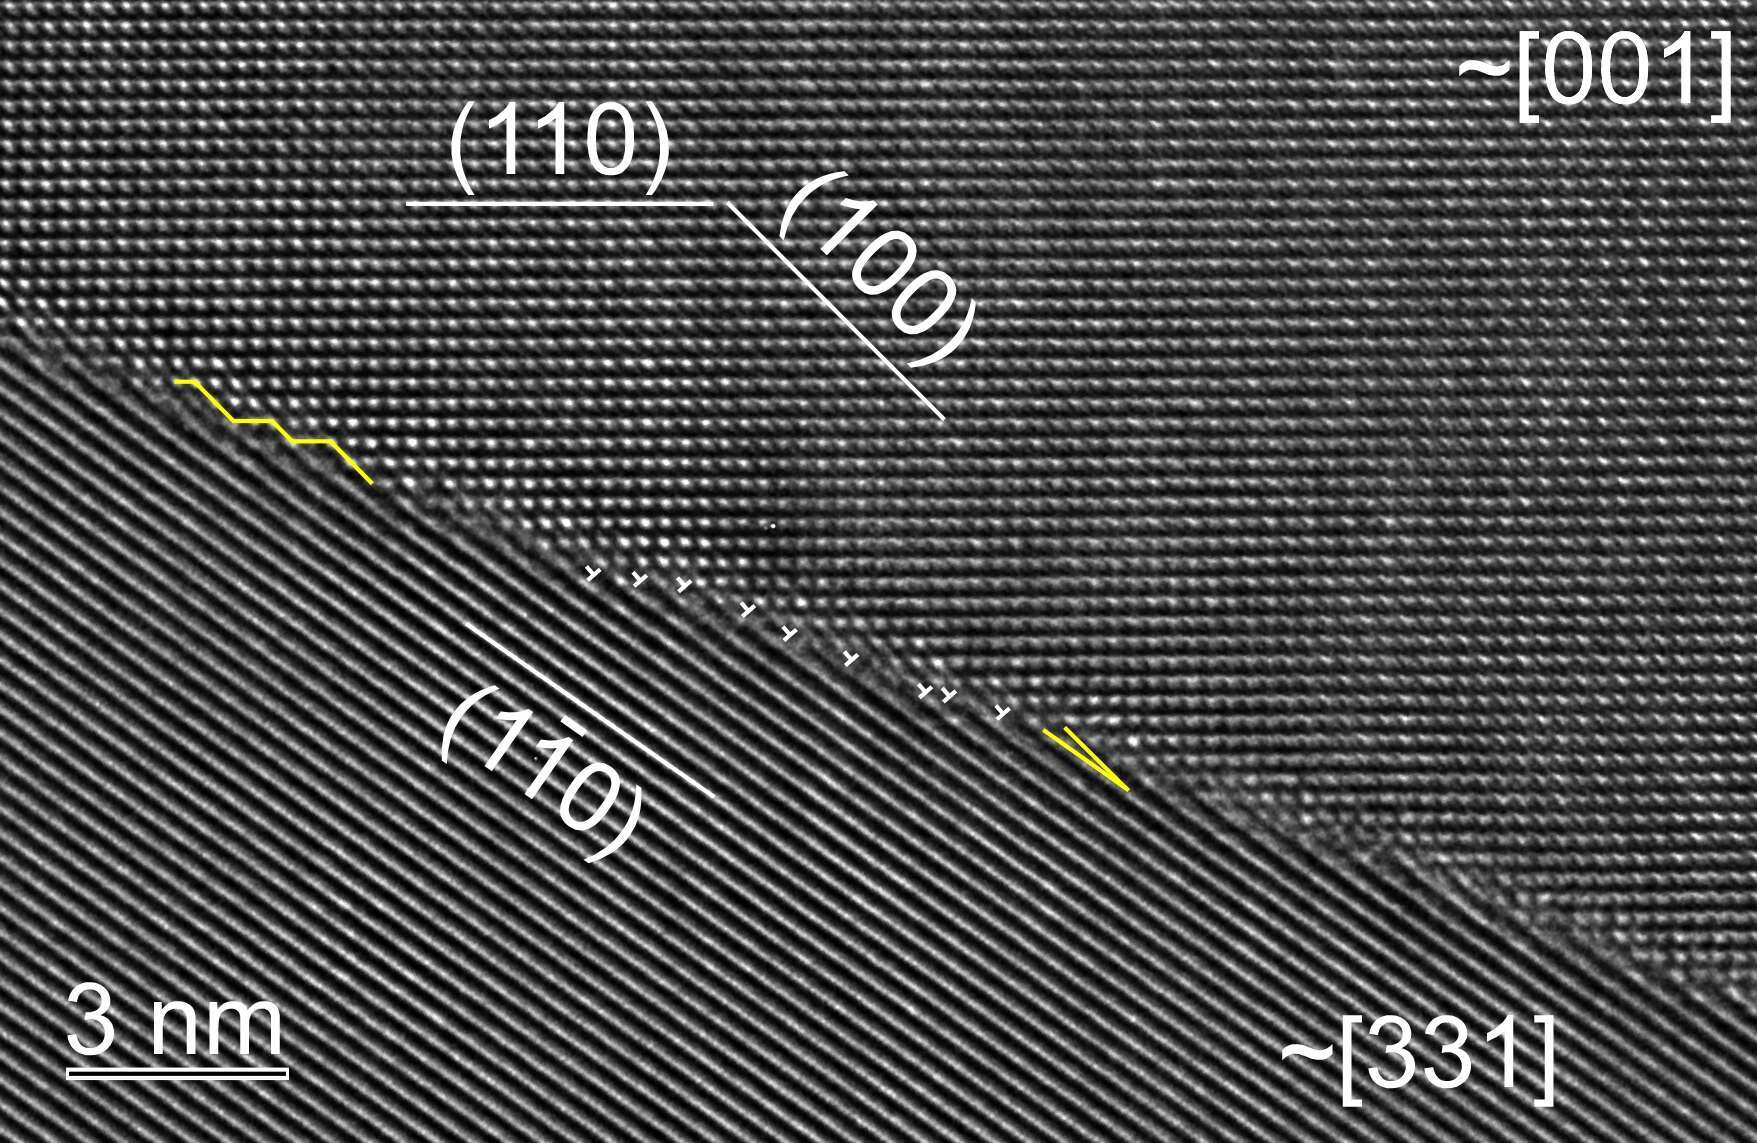 Figure 1: HRTEM micrograph of an edge-on general grain boundary in polycrystalline SrTiO3 annealed at 1350˚C for 10hr oxygen and furnace cooled. Nanometer length-scale steps and dislocations are visible along the boundary. The micrograph was acquired using a Cs of -5.7 μm, and Wiener filtered to remove noise. 